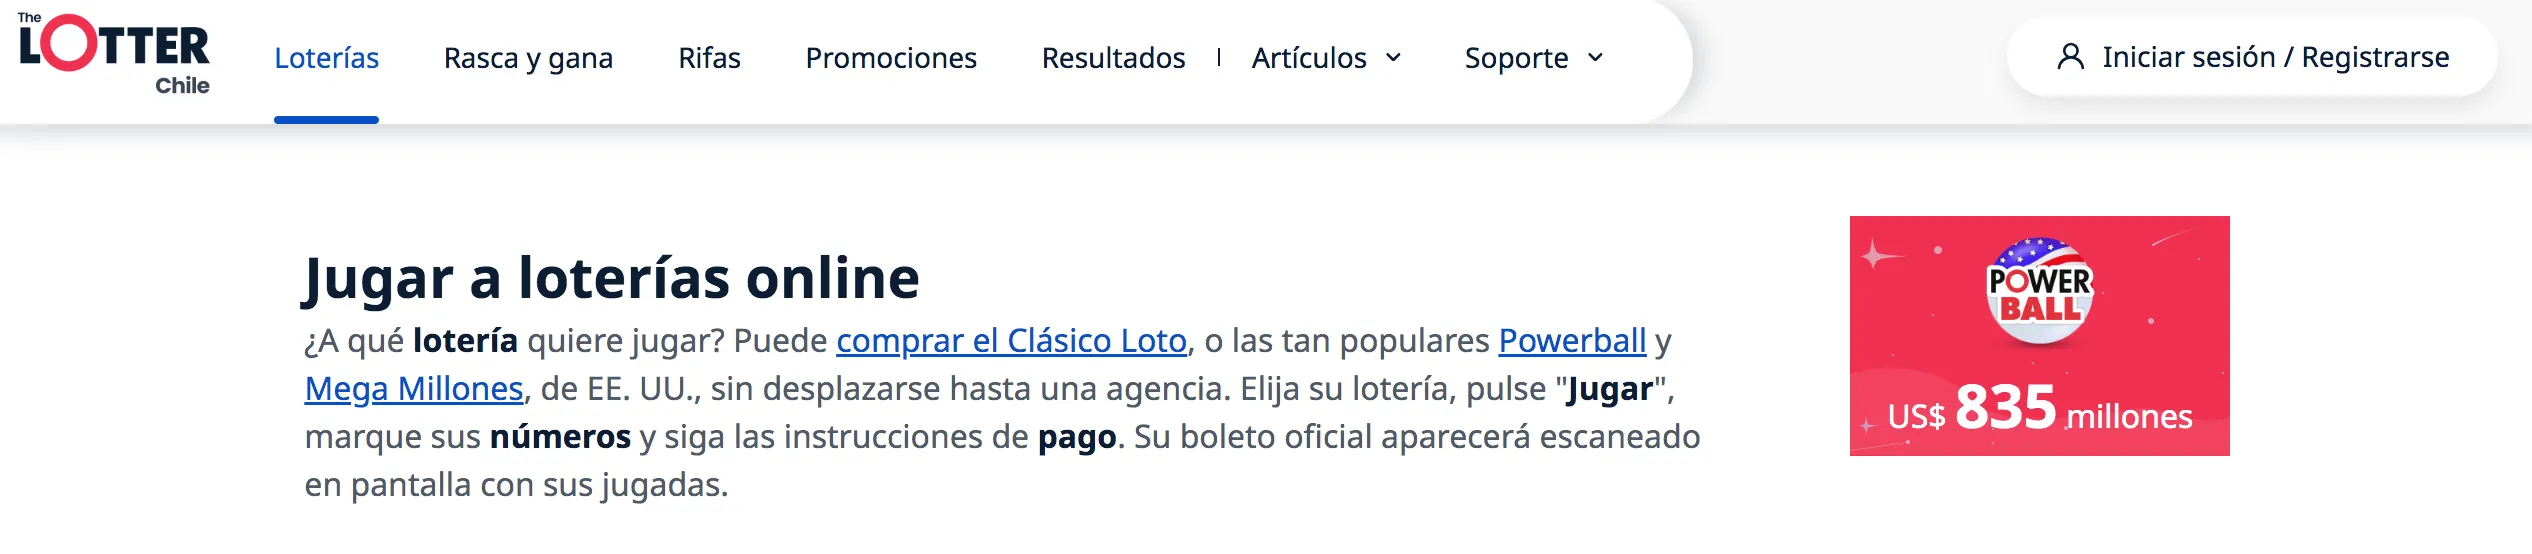 Lotería online Chile